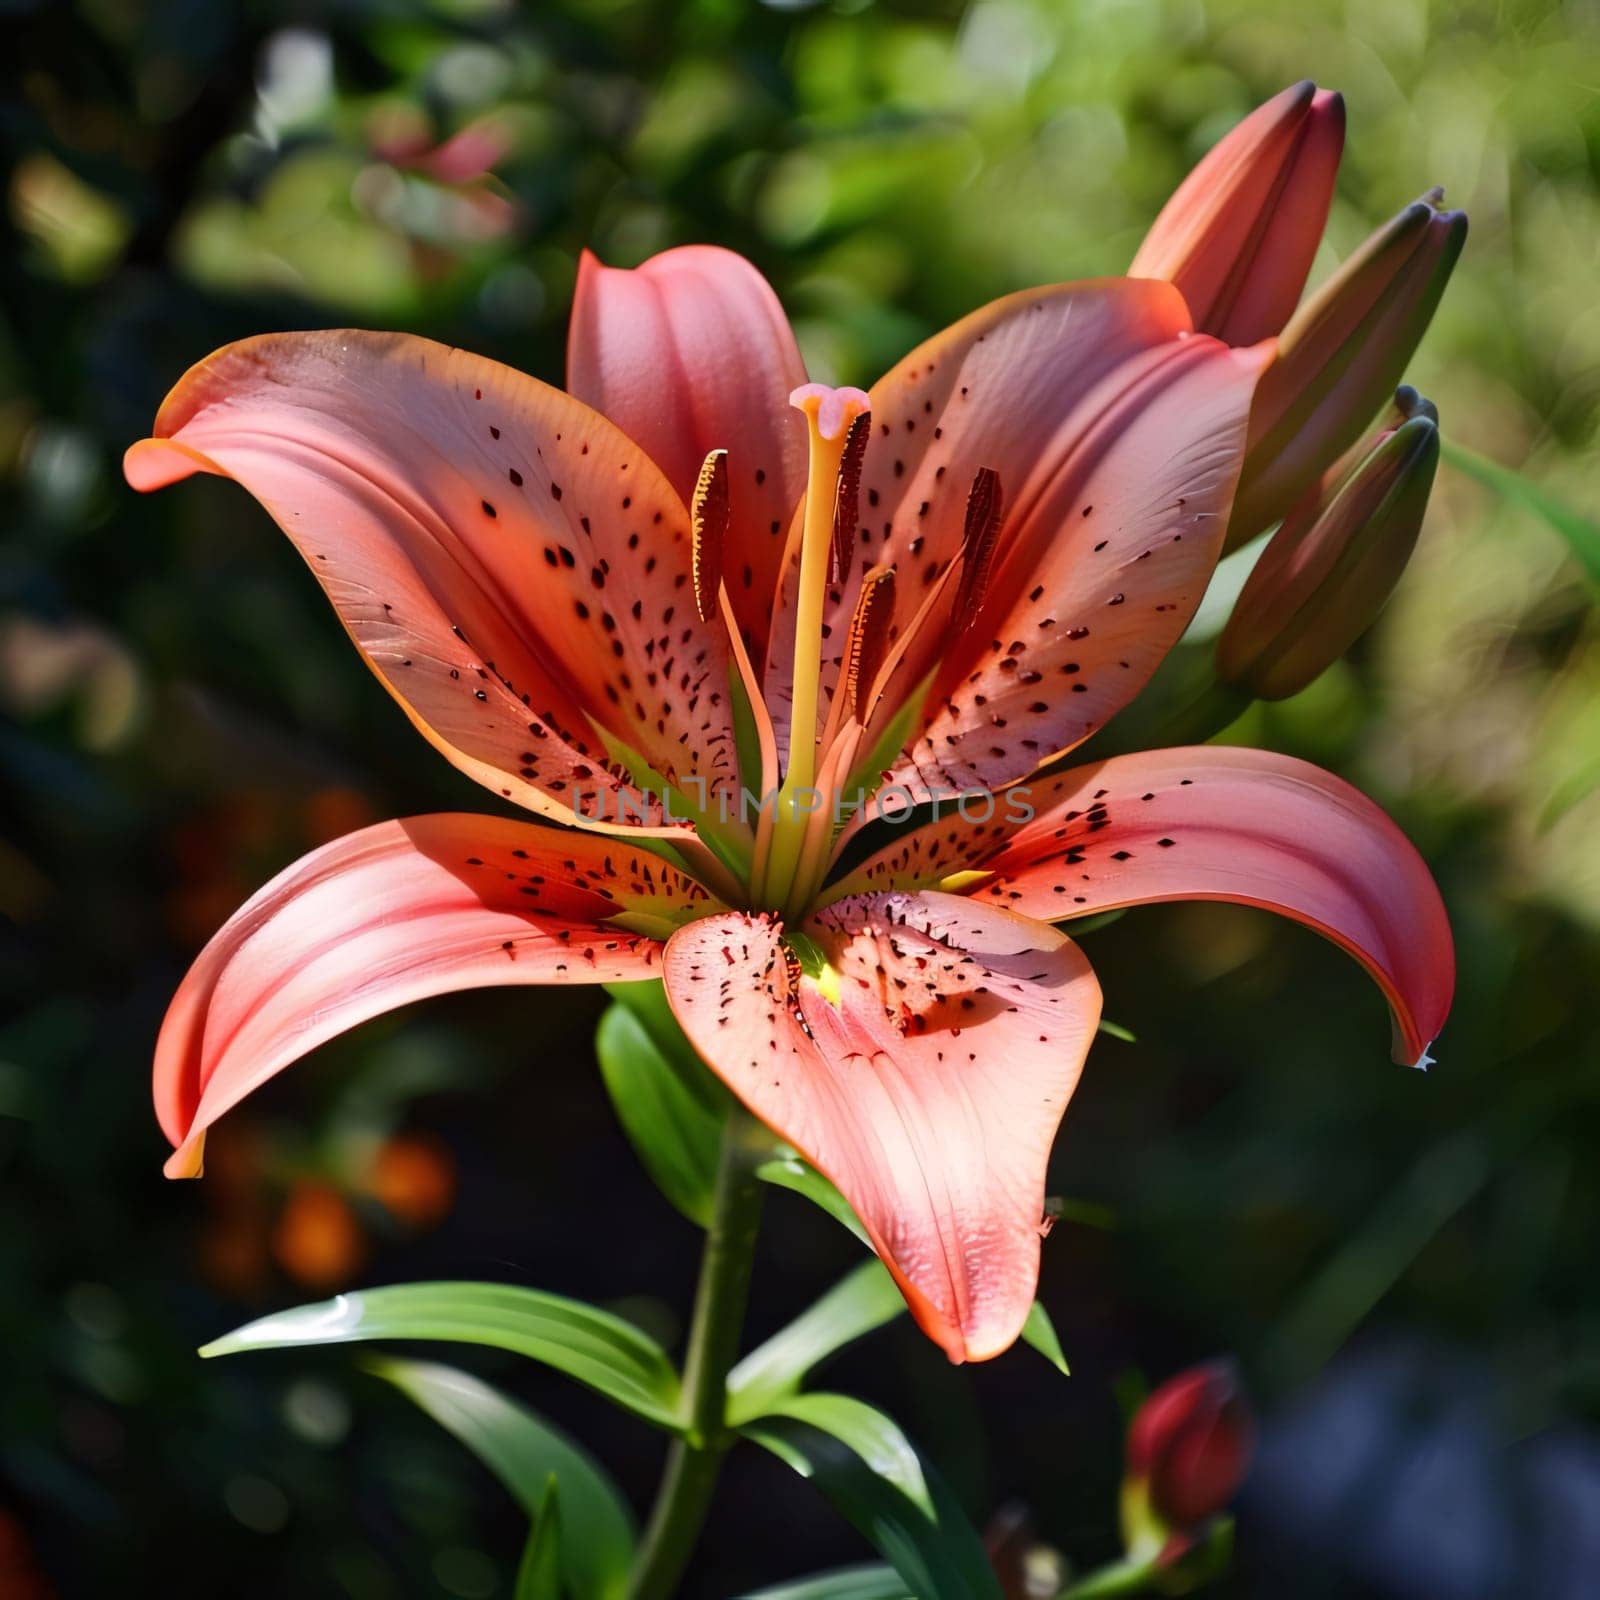 Tiger lily close-up photo of smudged green in the background. Flowering flowers, a symbol of spring, new life. by ThemesS